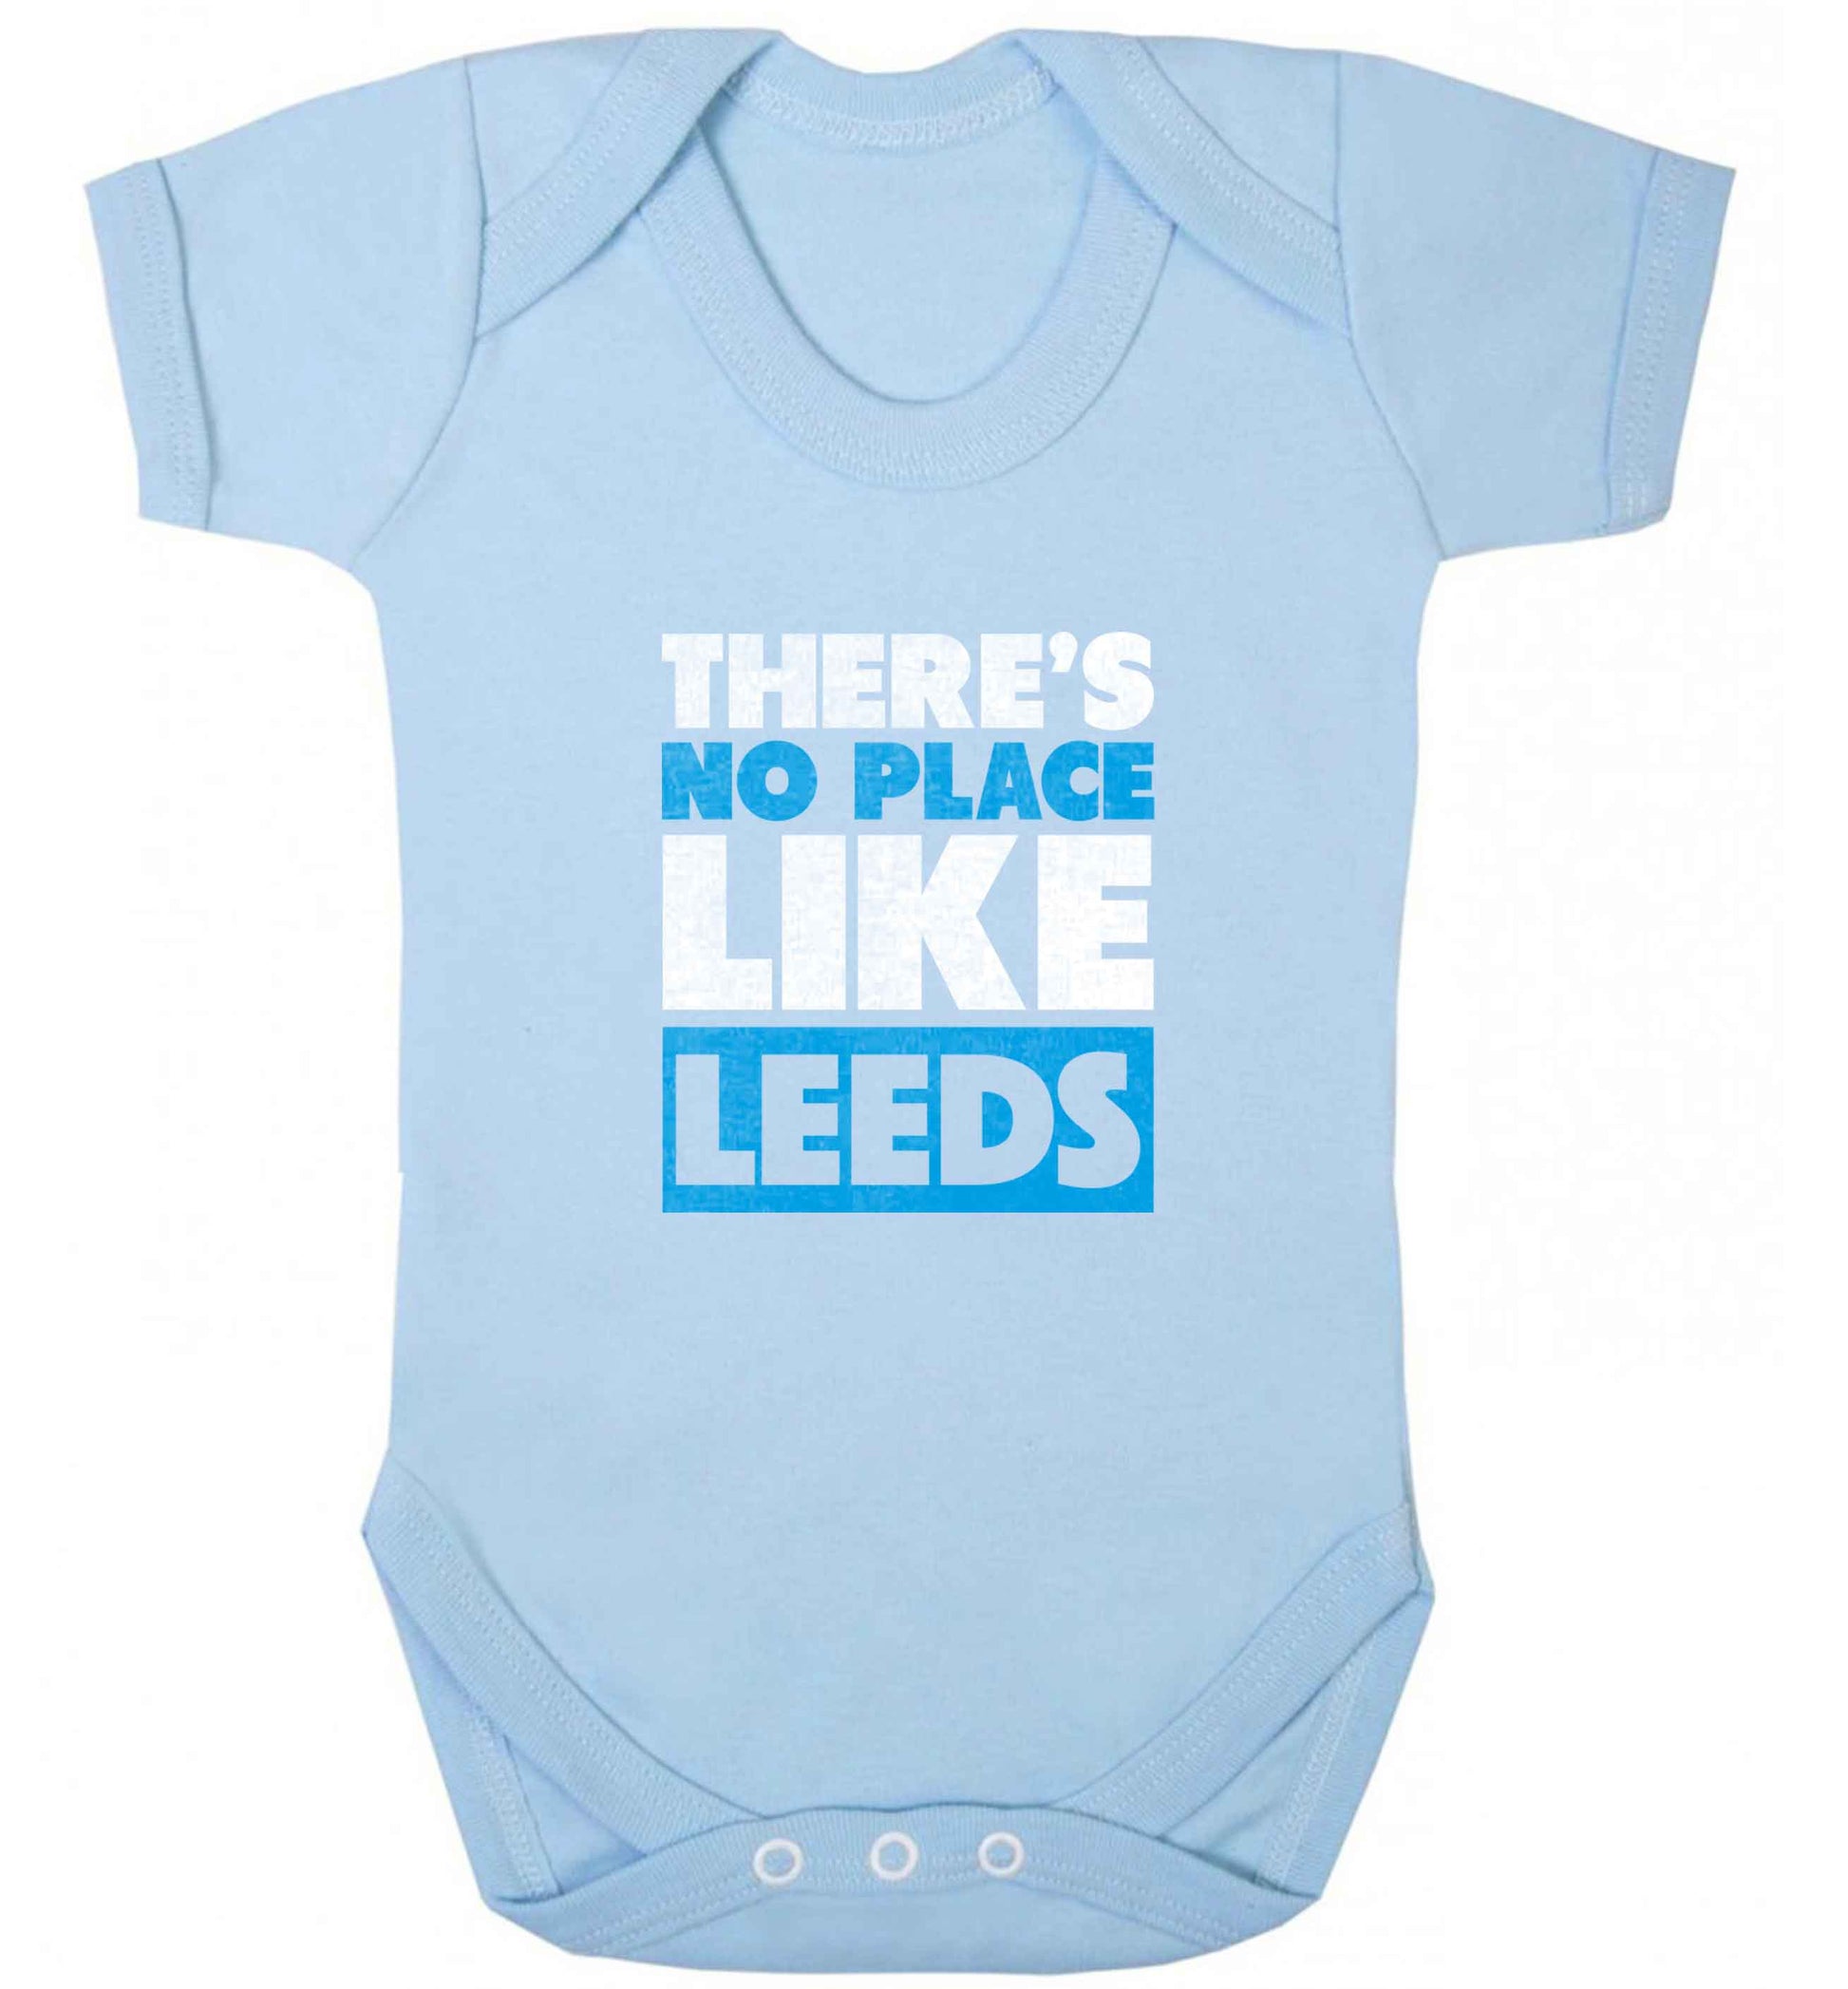 There's no place like Leeds baby vest pale blue 18-24 months